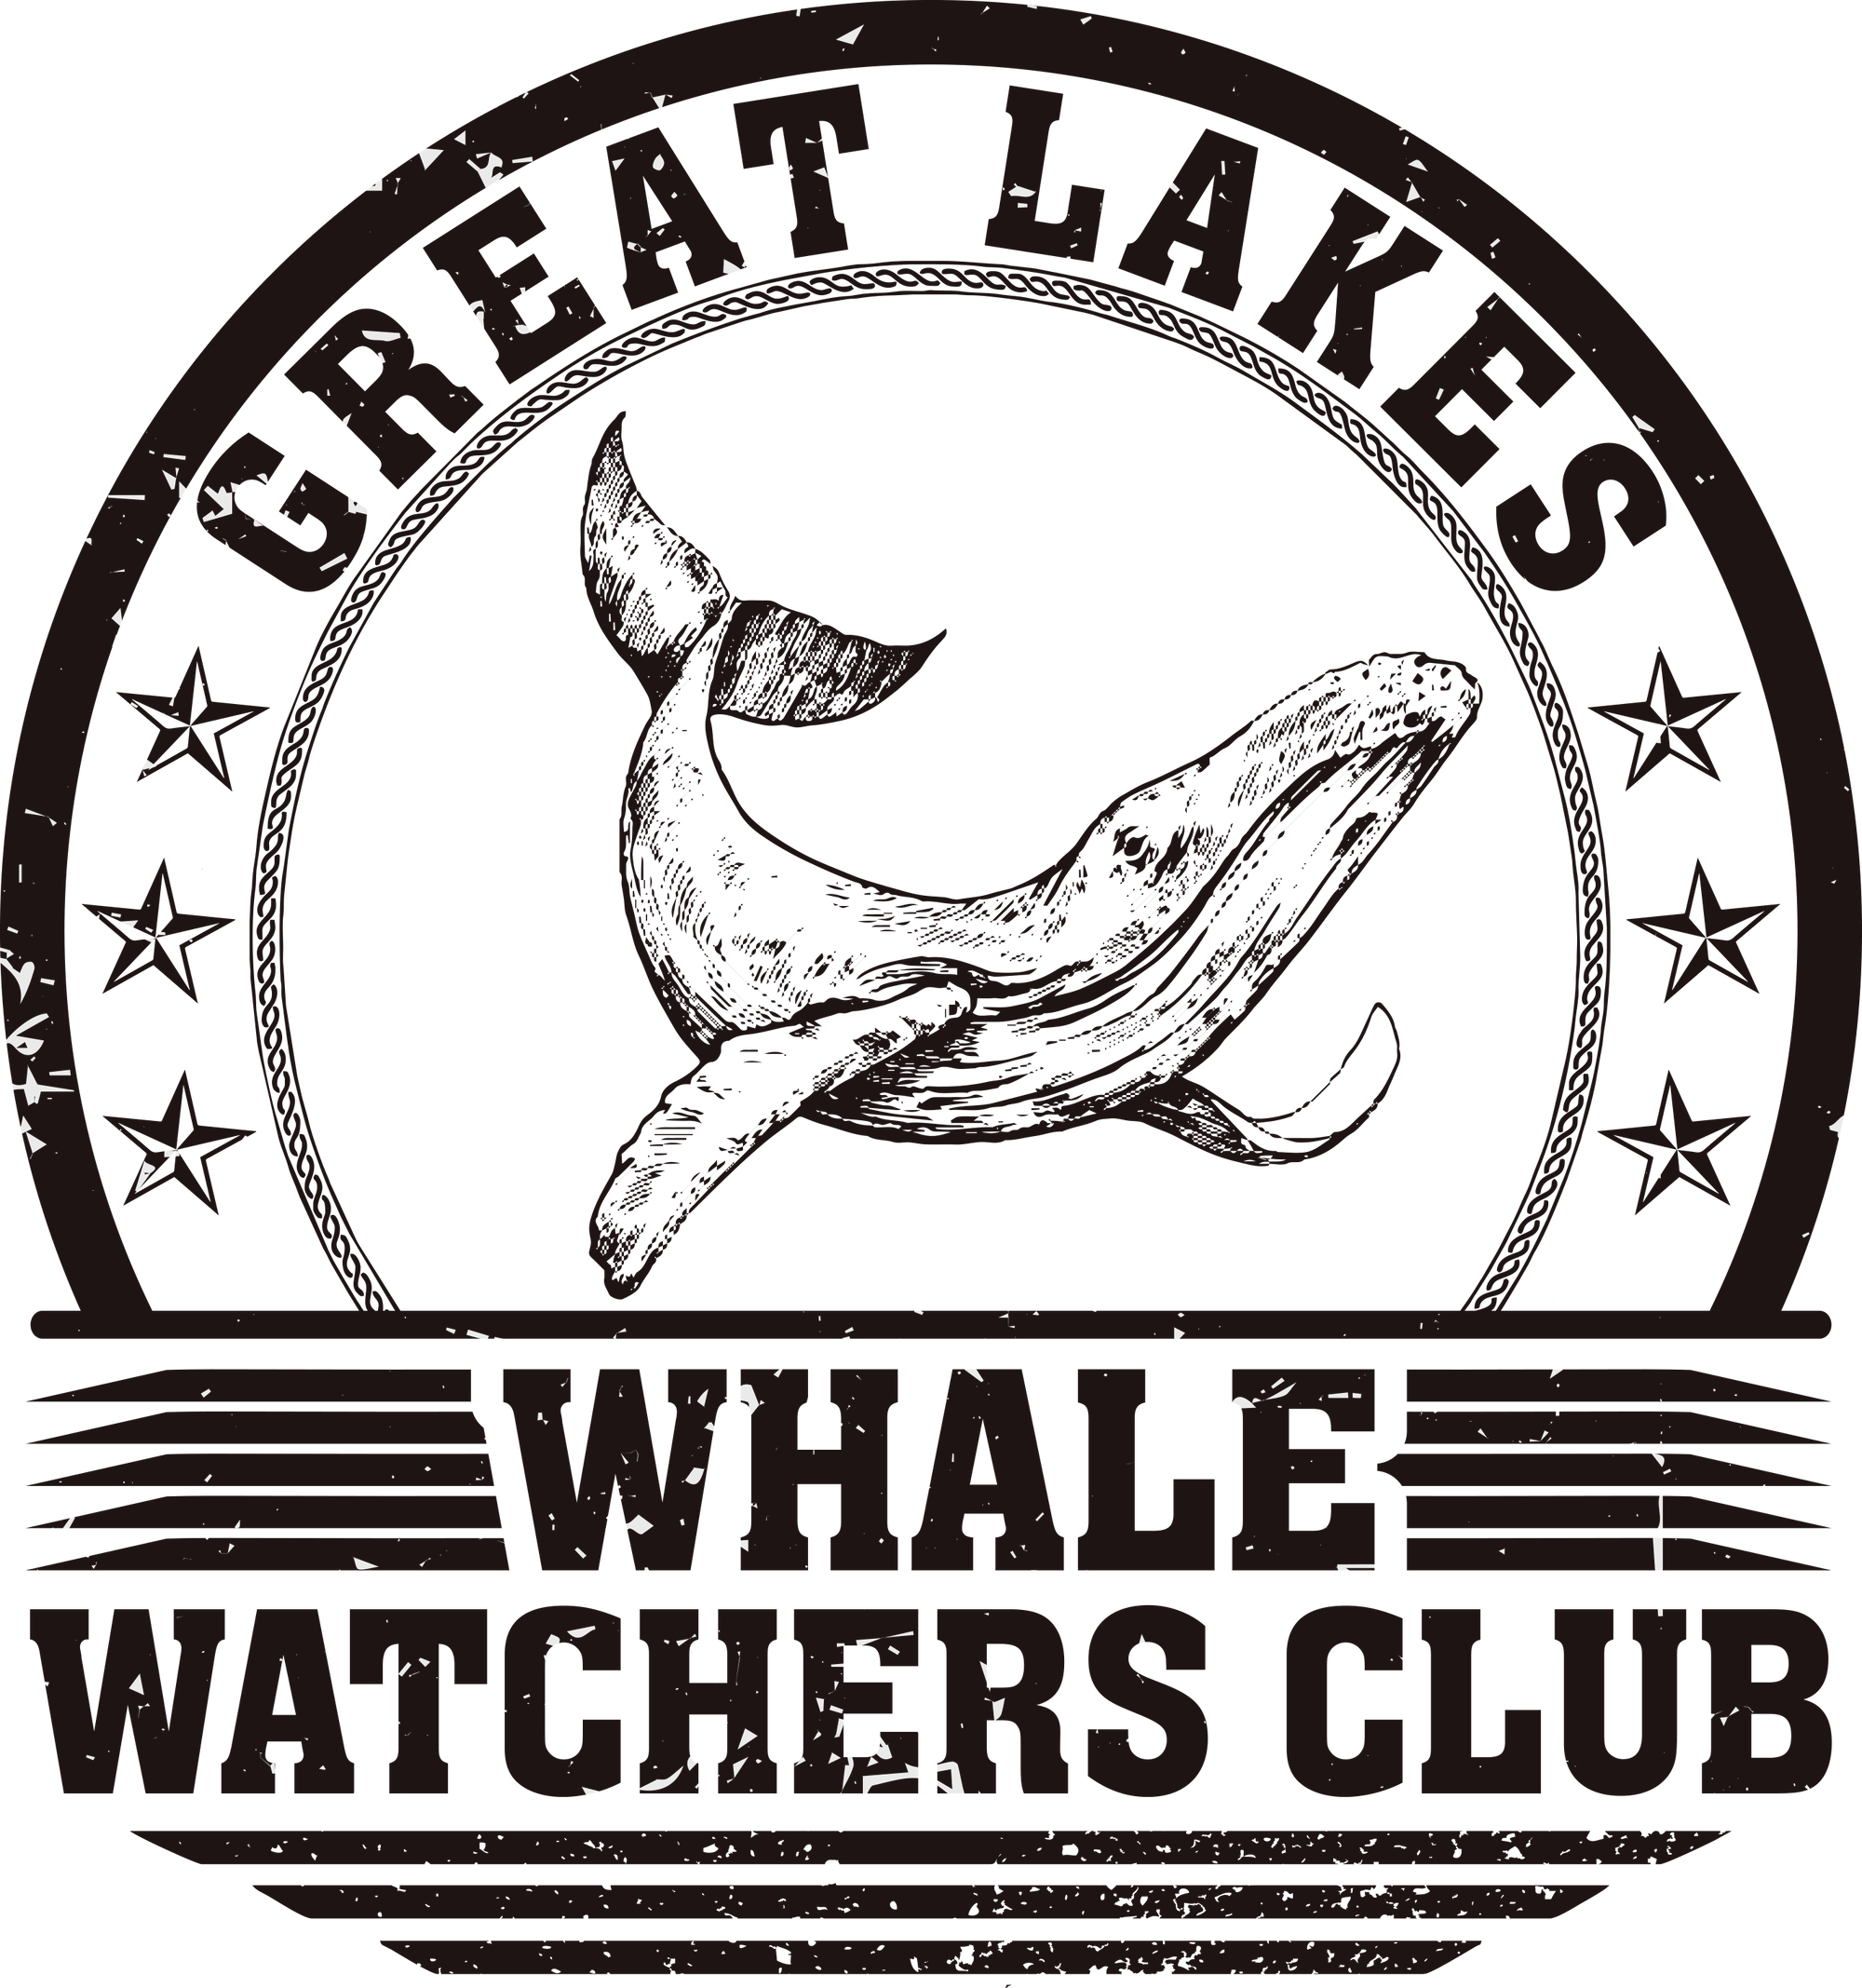 Great Lakes Whale Watchers Club